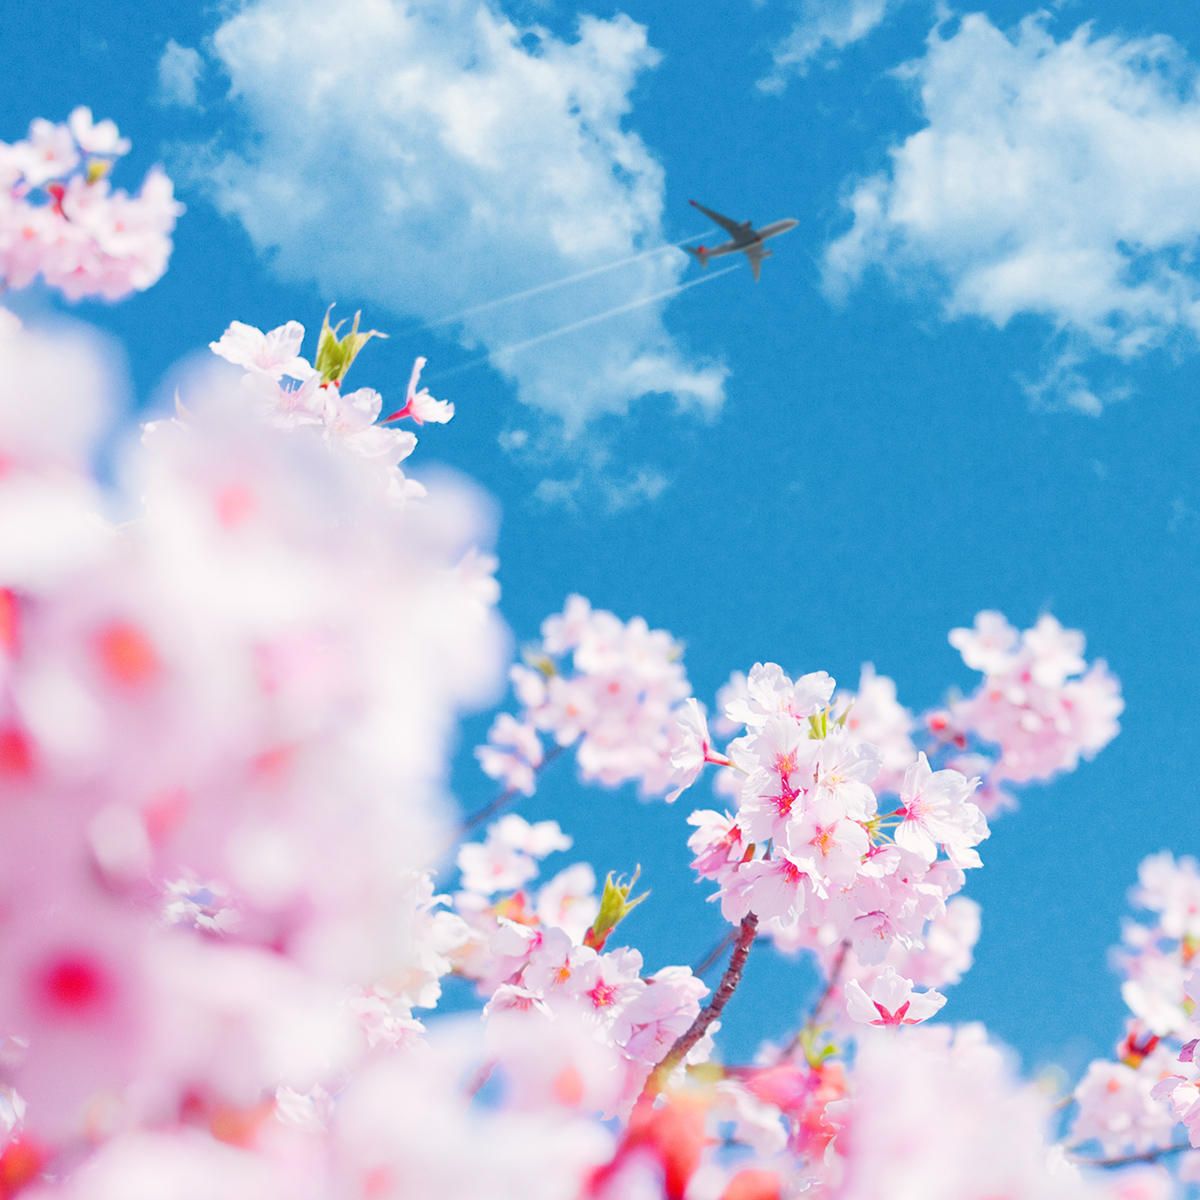 ✈️ The rejuvenated nature is calling us for new discoveries with the arrival of spring! #TurkishAirlines